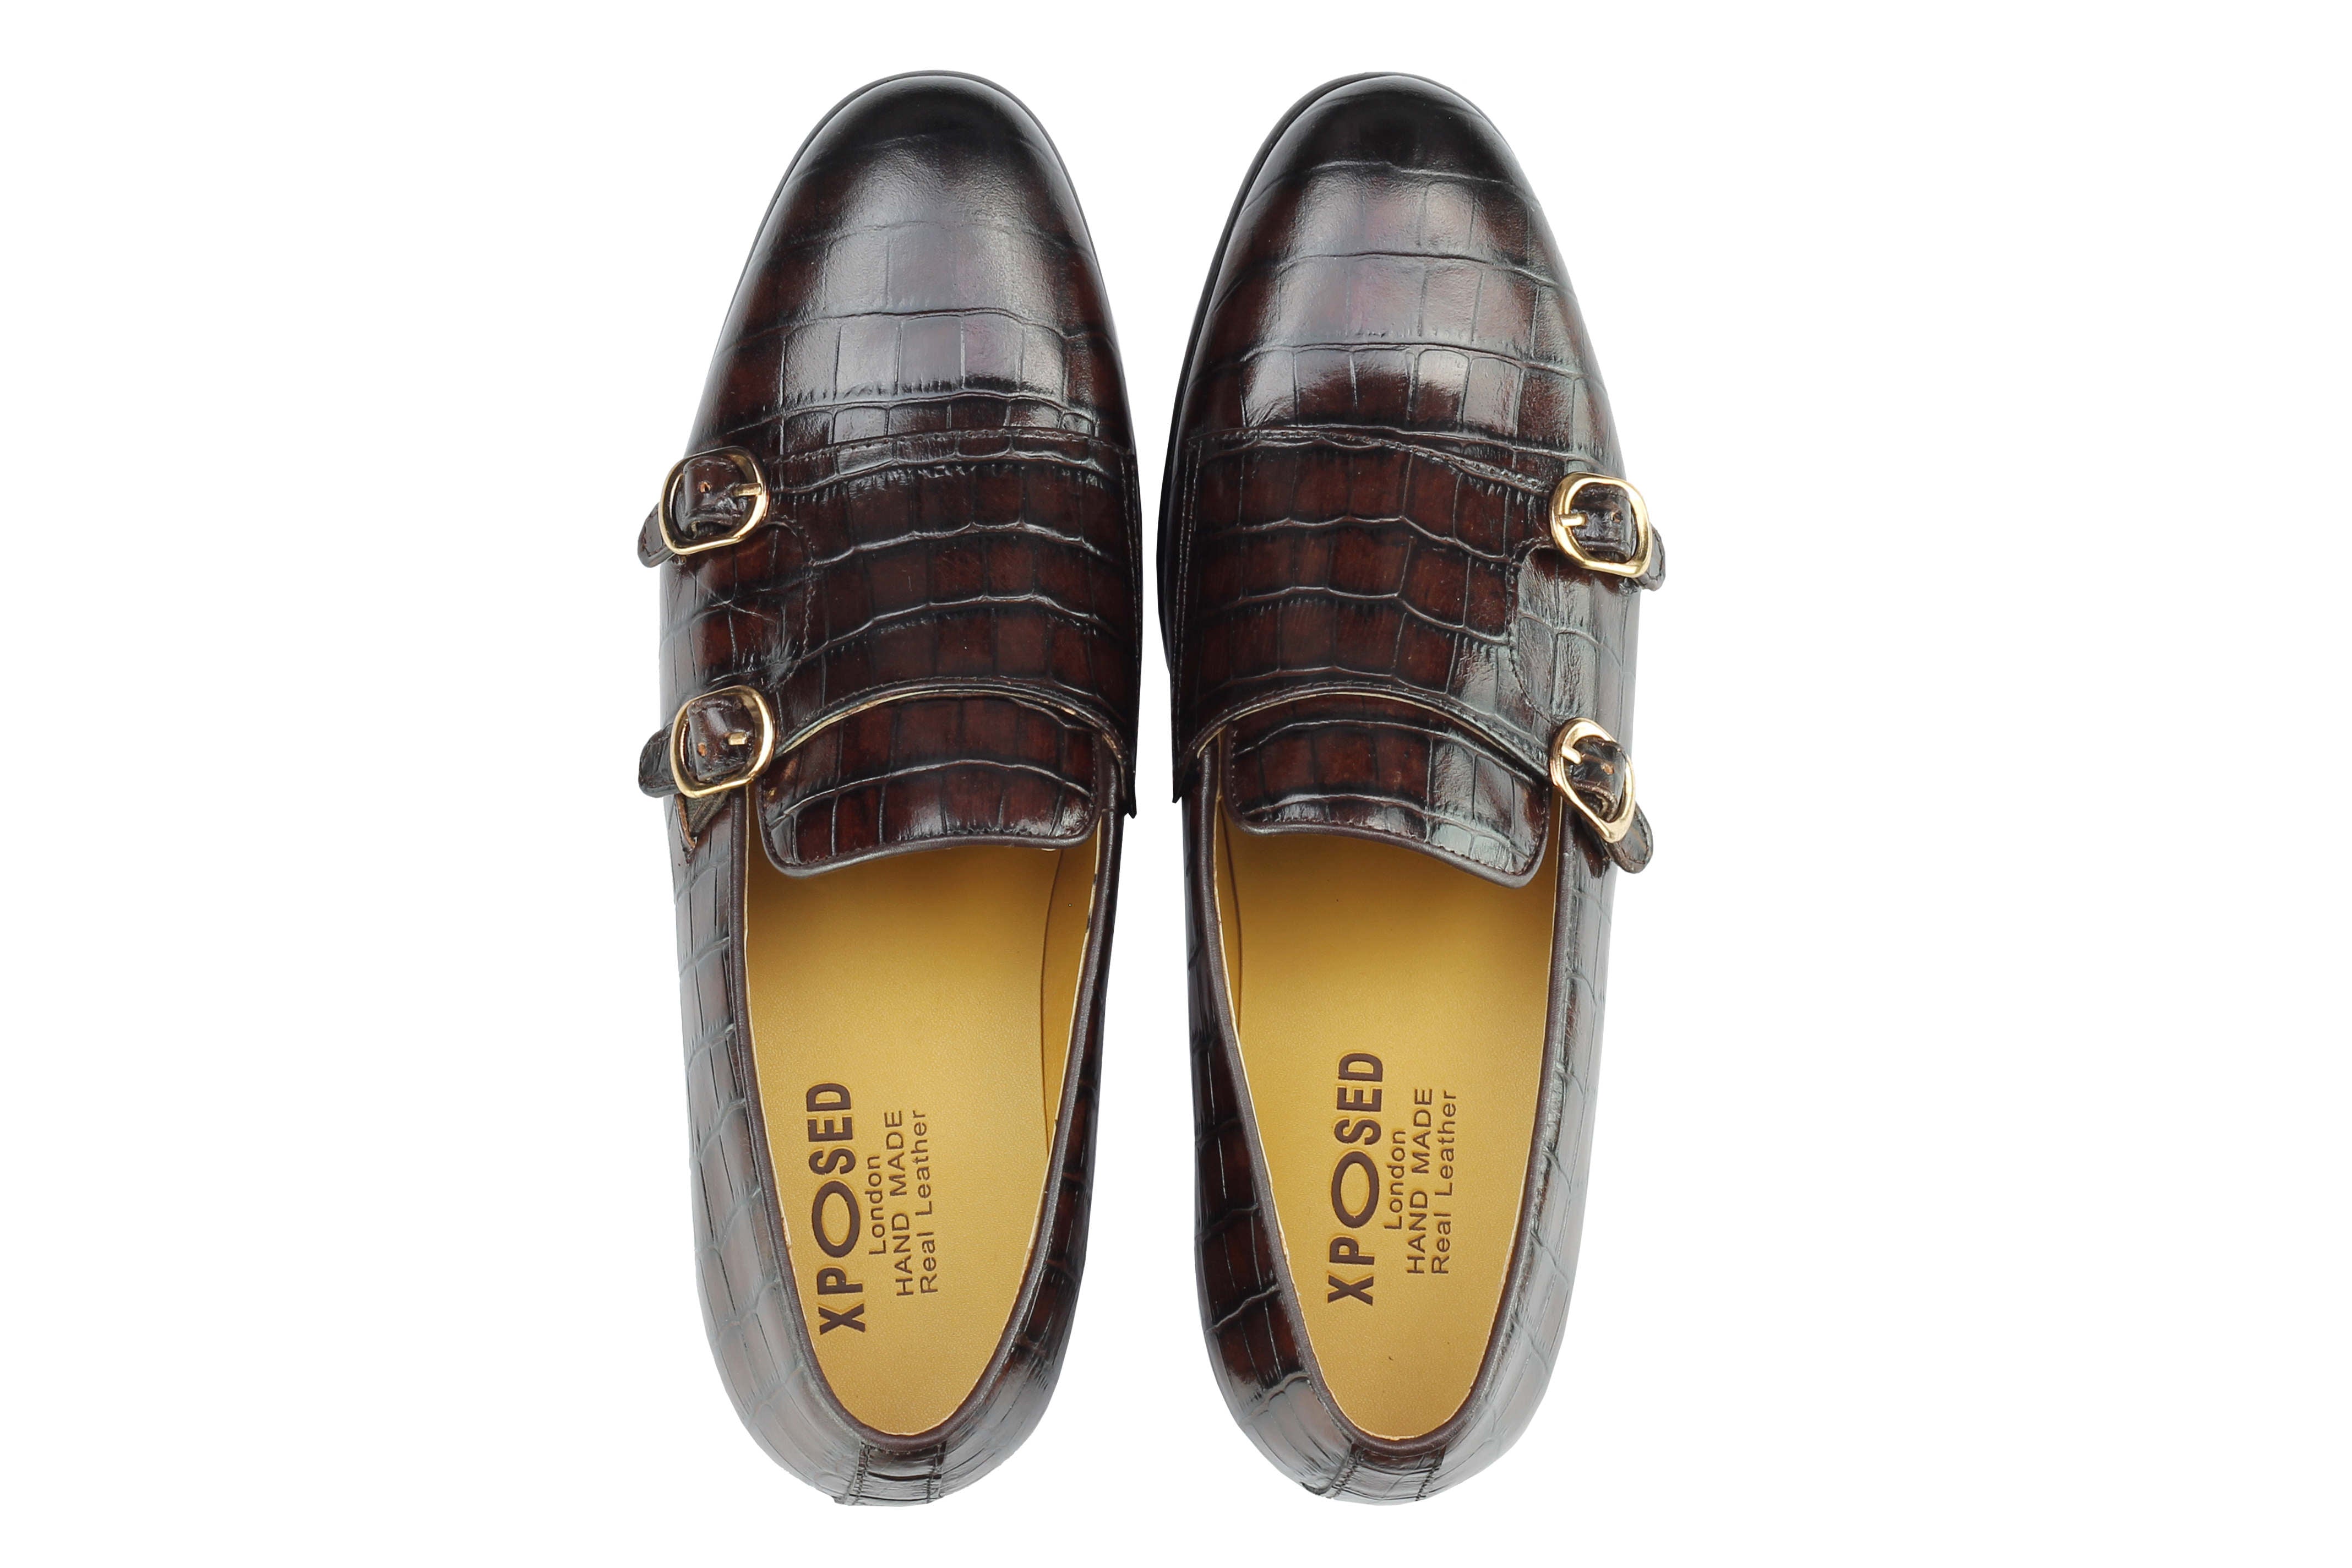 Real Leather Double Strap Monk Brown Loafer